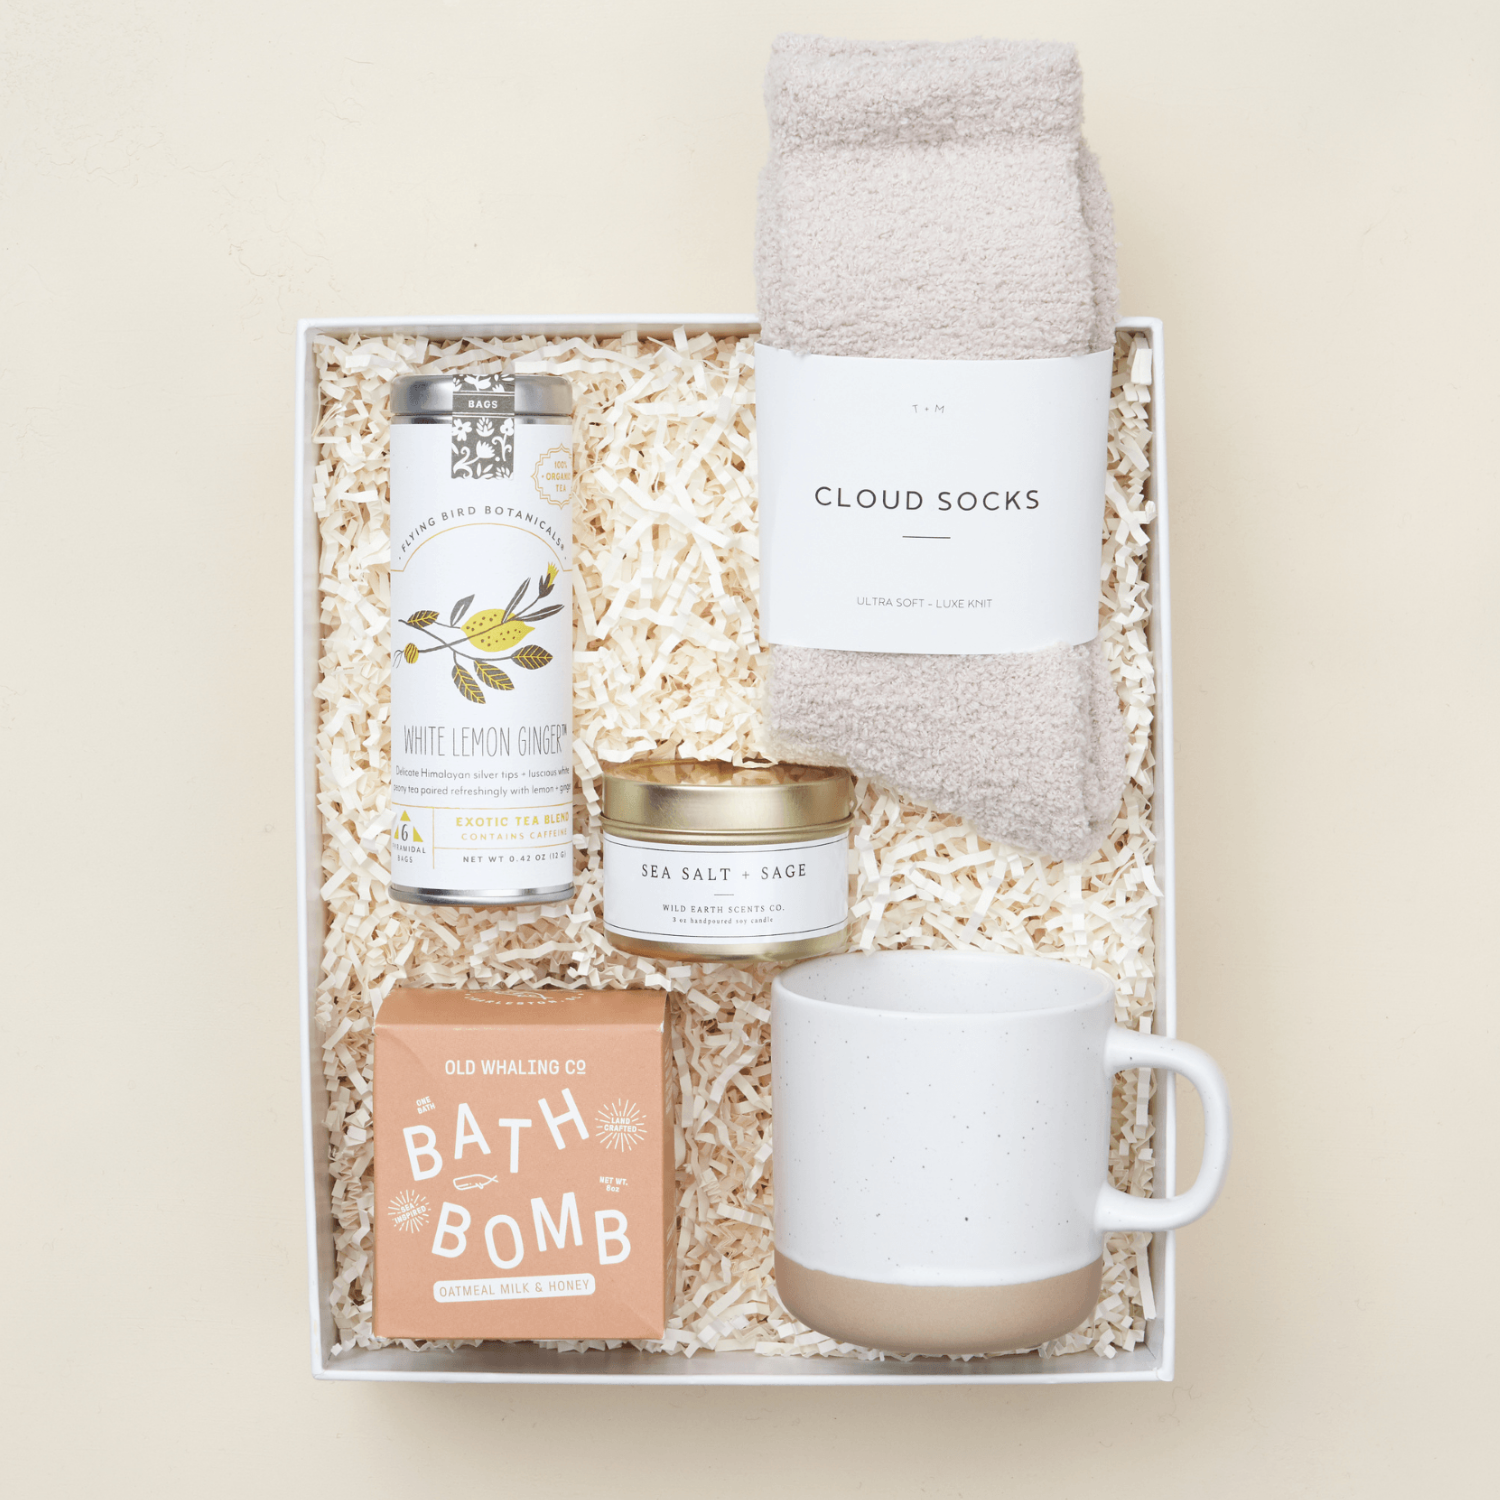 Get Well Soon Gift Box For Women With Tea, Mug & Bath Bomb By Unboxme